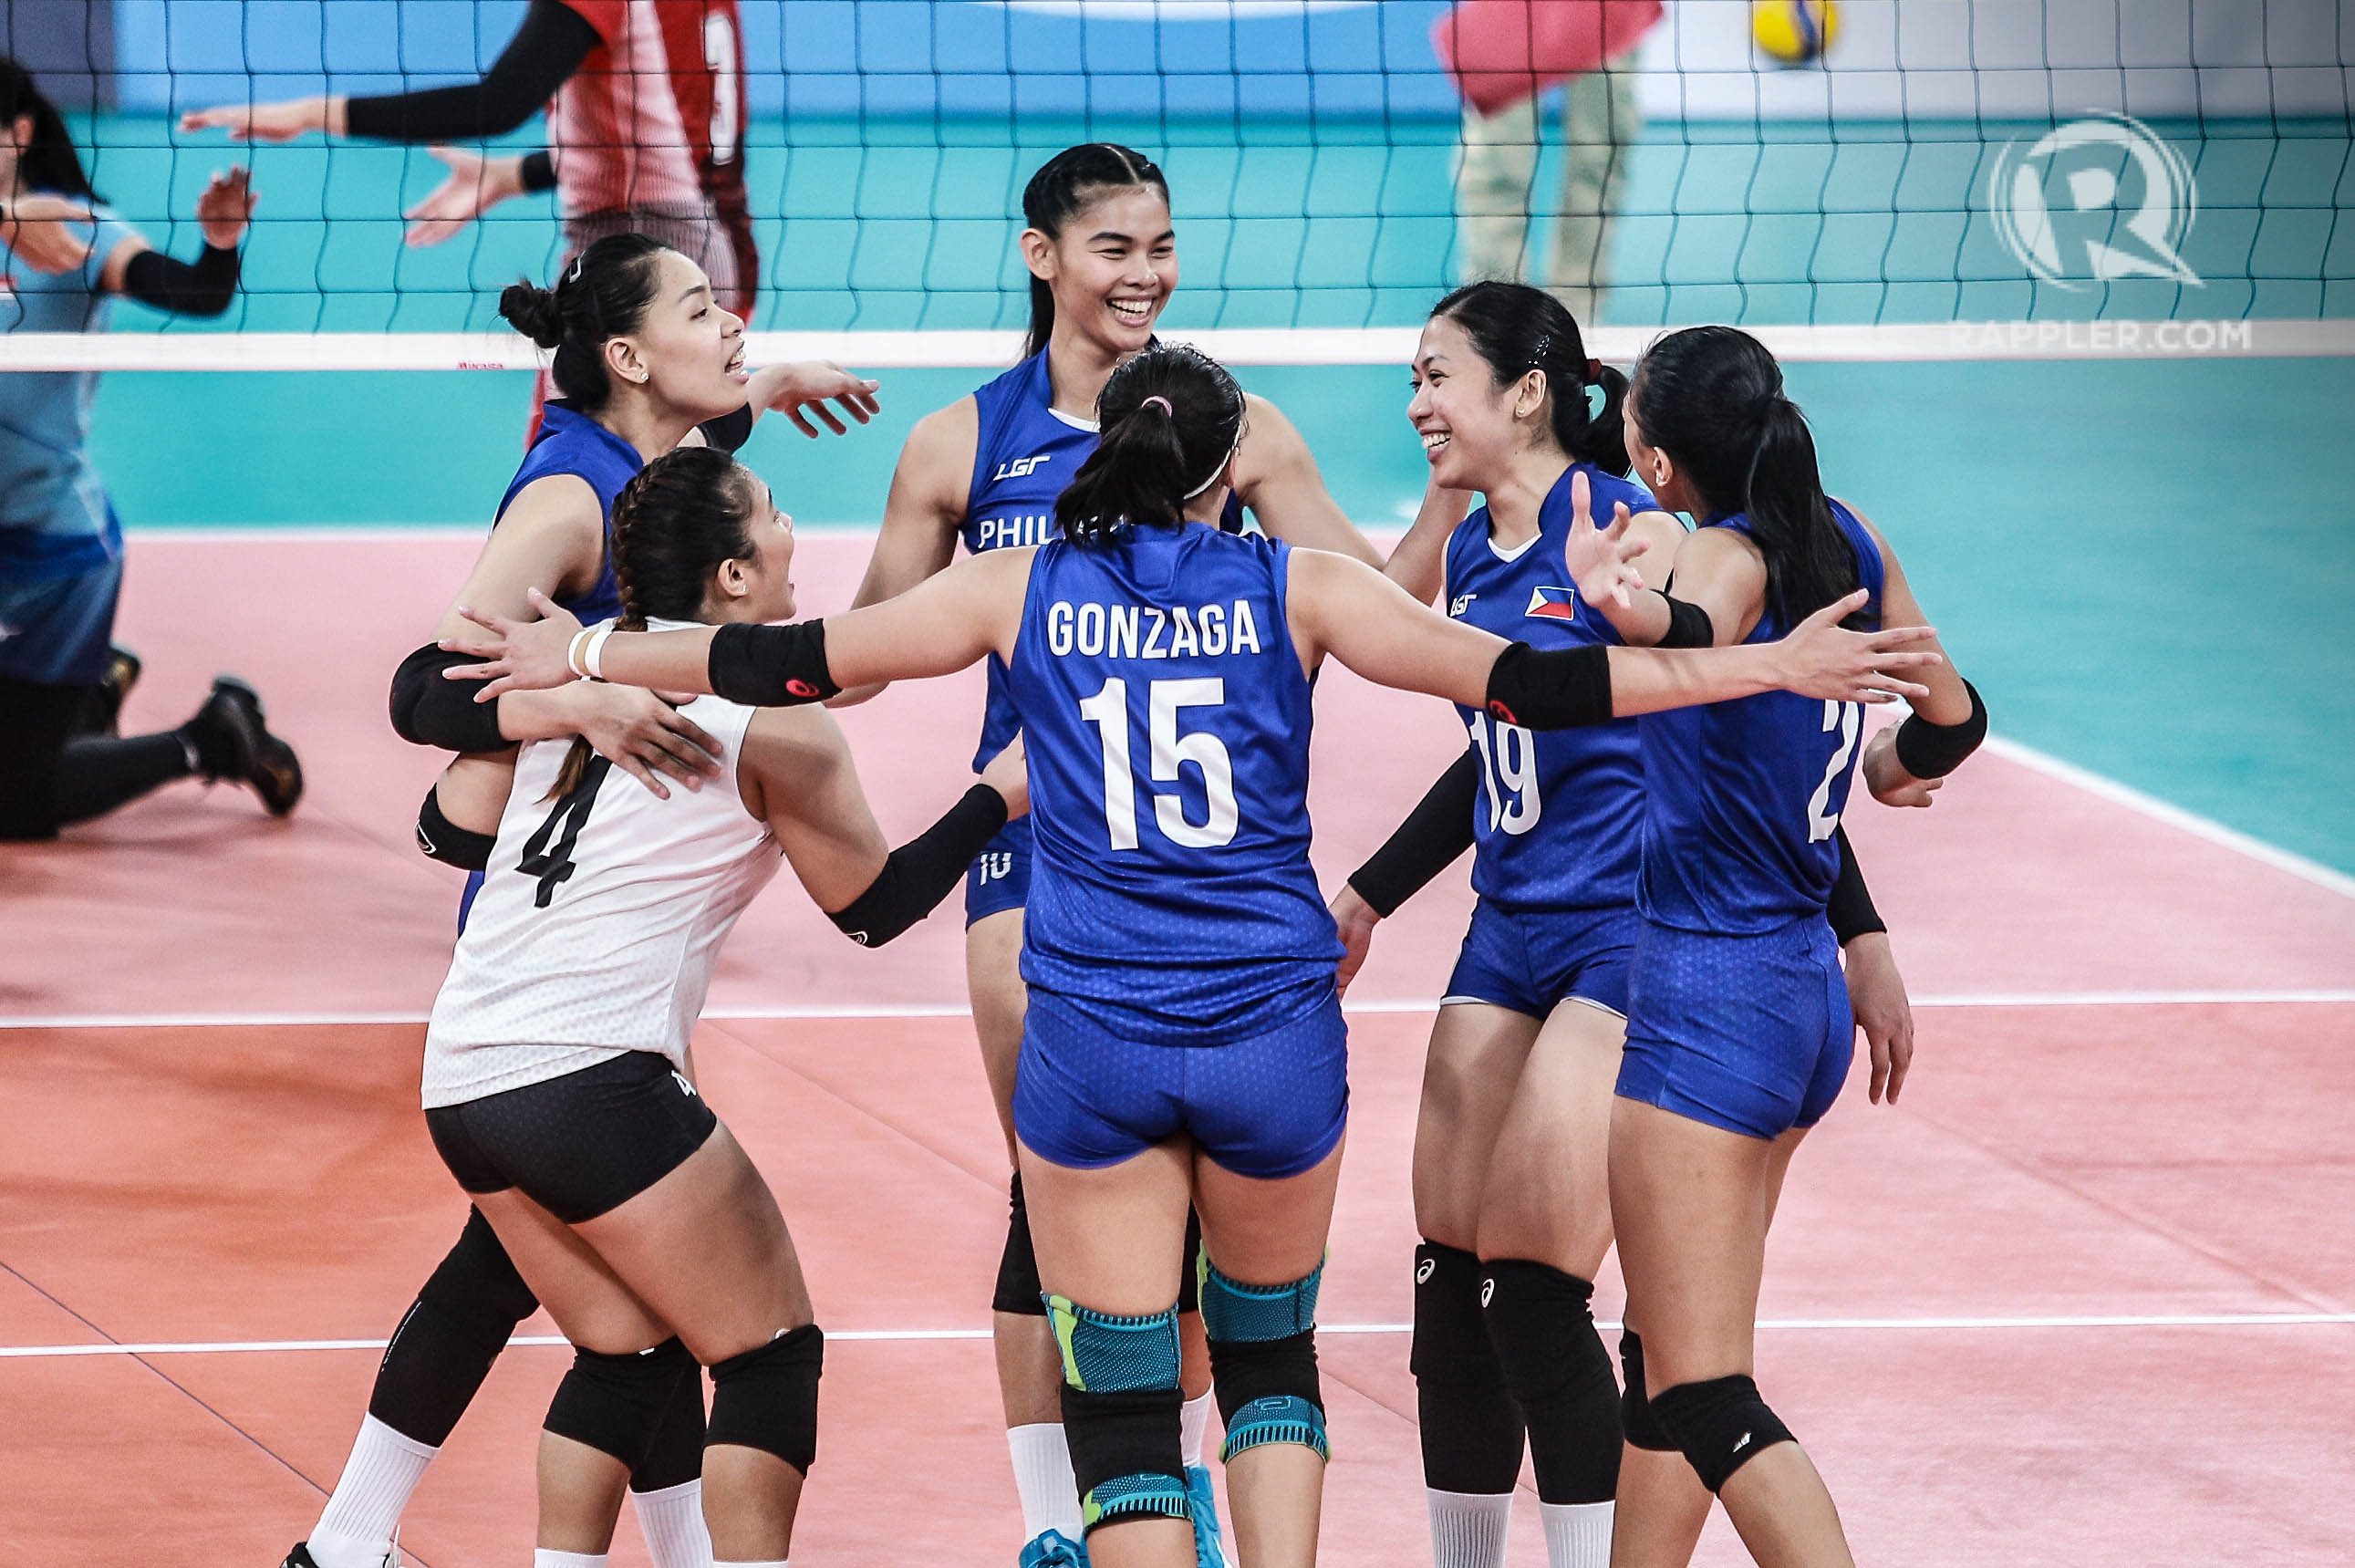 FIVB officially recognizes Philippine volleyball federation